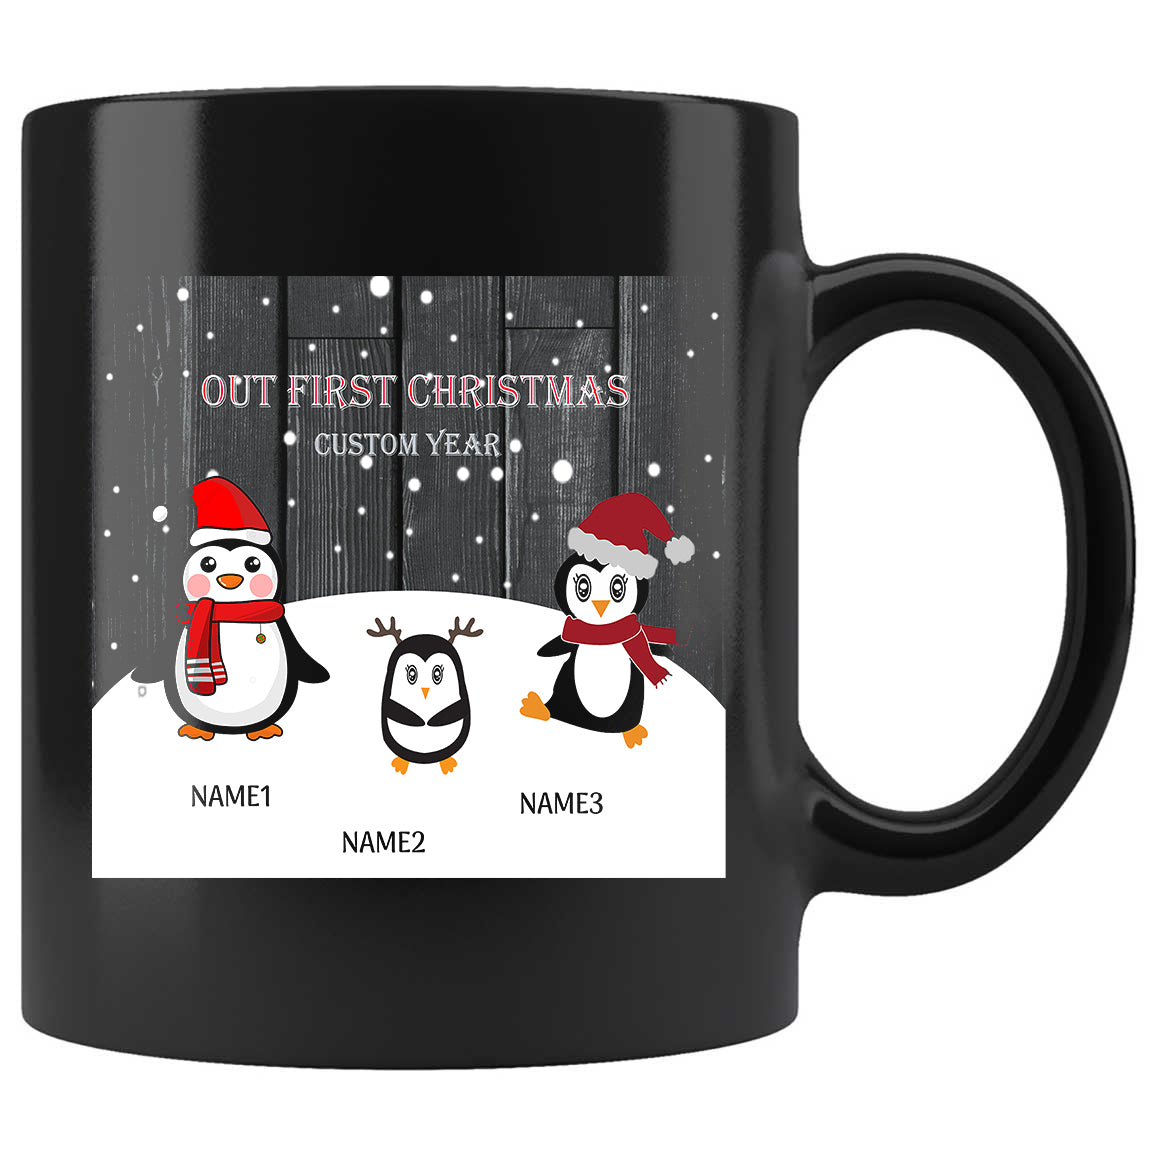 Our 1st Christmas Personalized For Friends And Family Skitongifts Funny Ceramic Coffee Mug For Birthday, Mother's Day, Father's Day